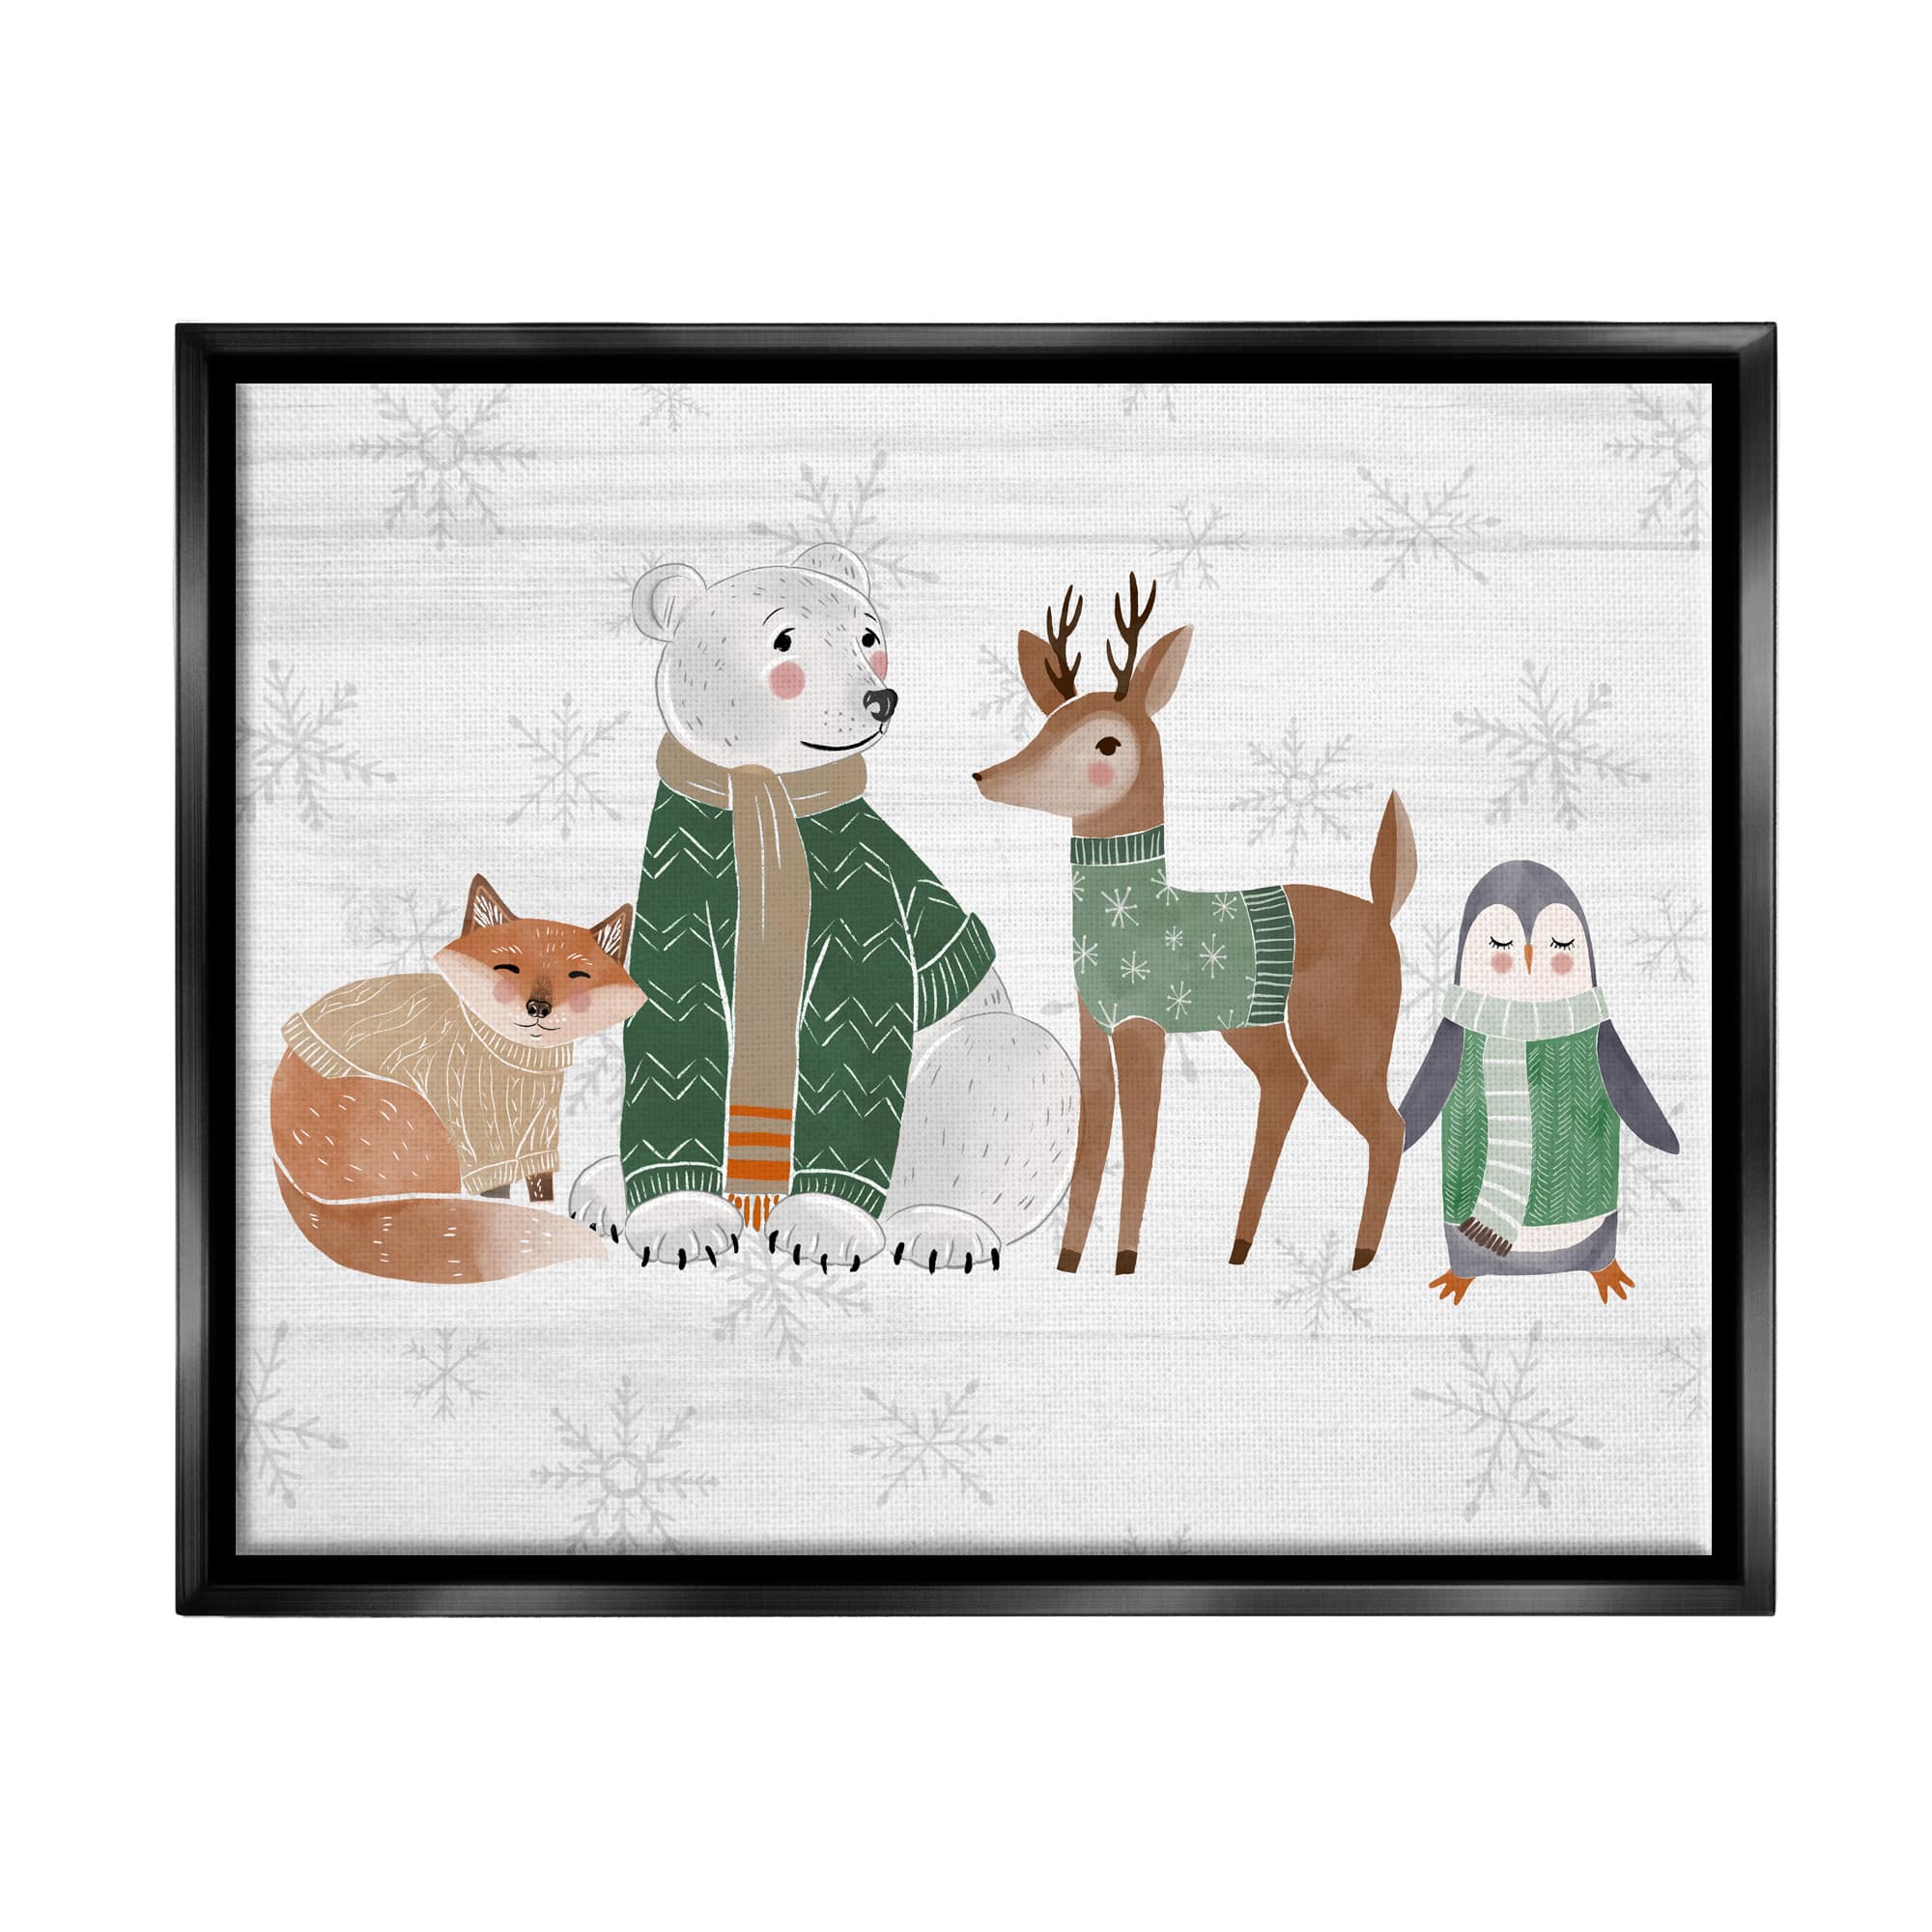 Stupell Industries Winter Wildlife Animals Snowflakes Framed Floater Canvas Wall Art